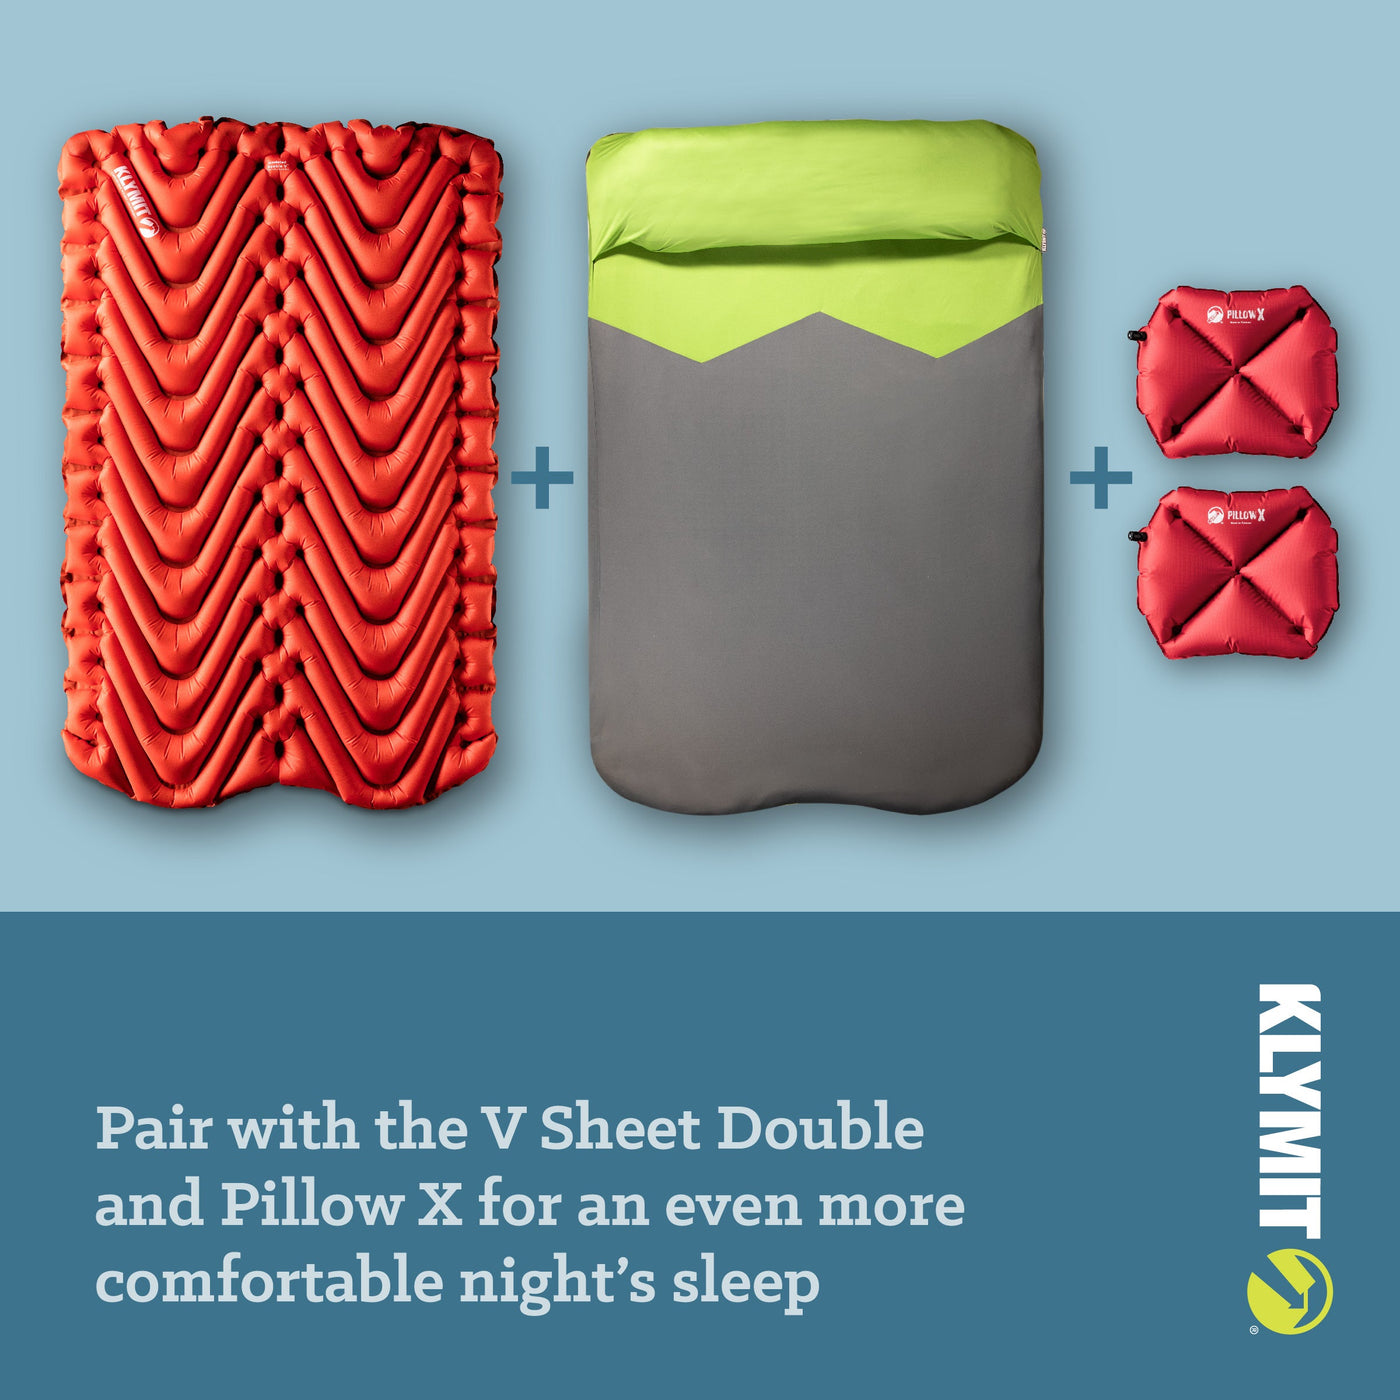 Insulated Double V by Klymit